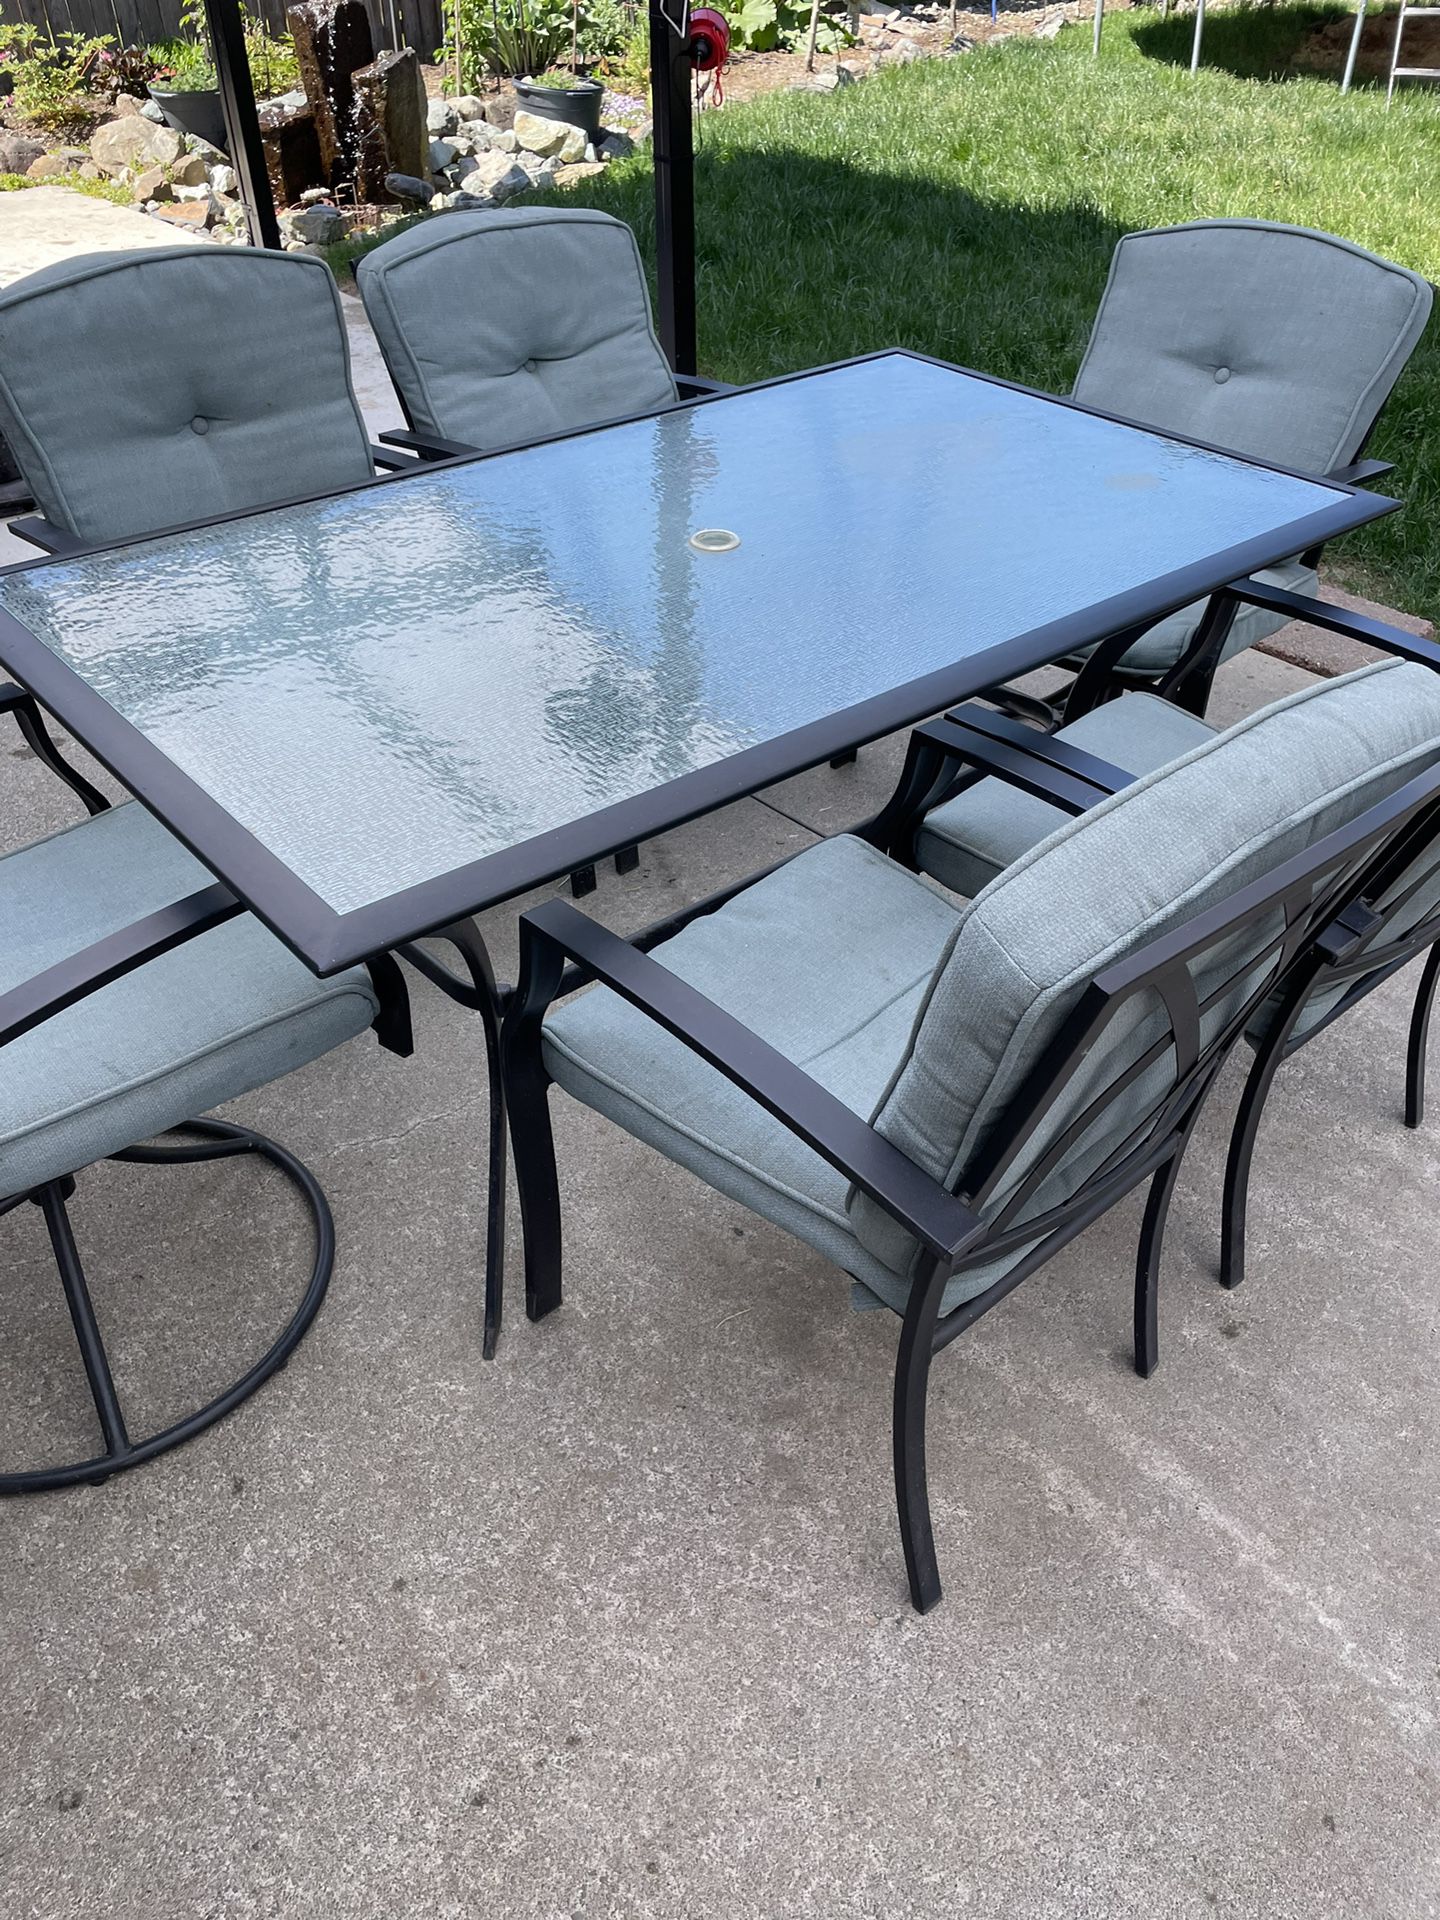 Patio Furniture Set - Glass Table & 6 Chairs